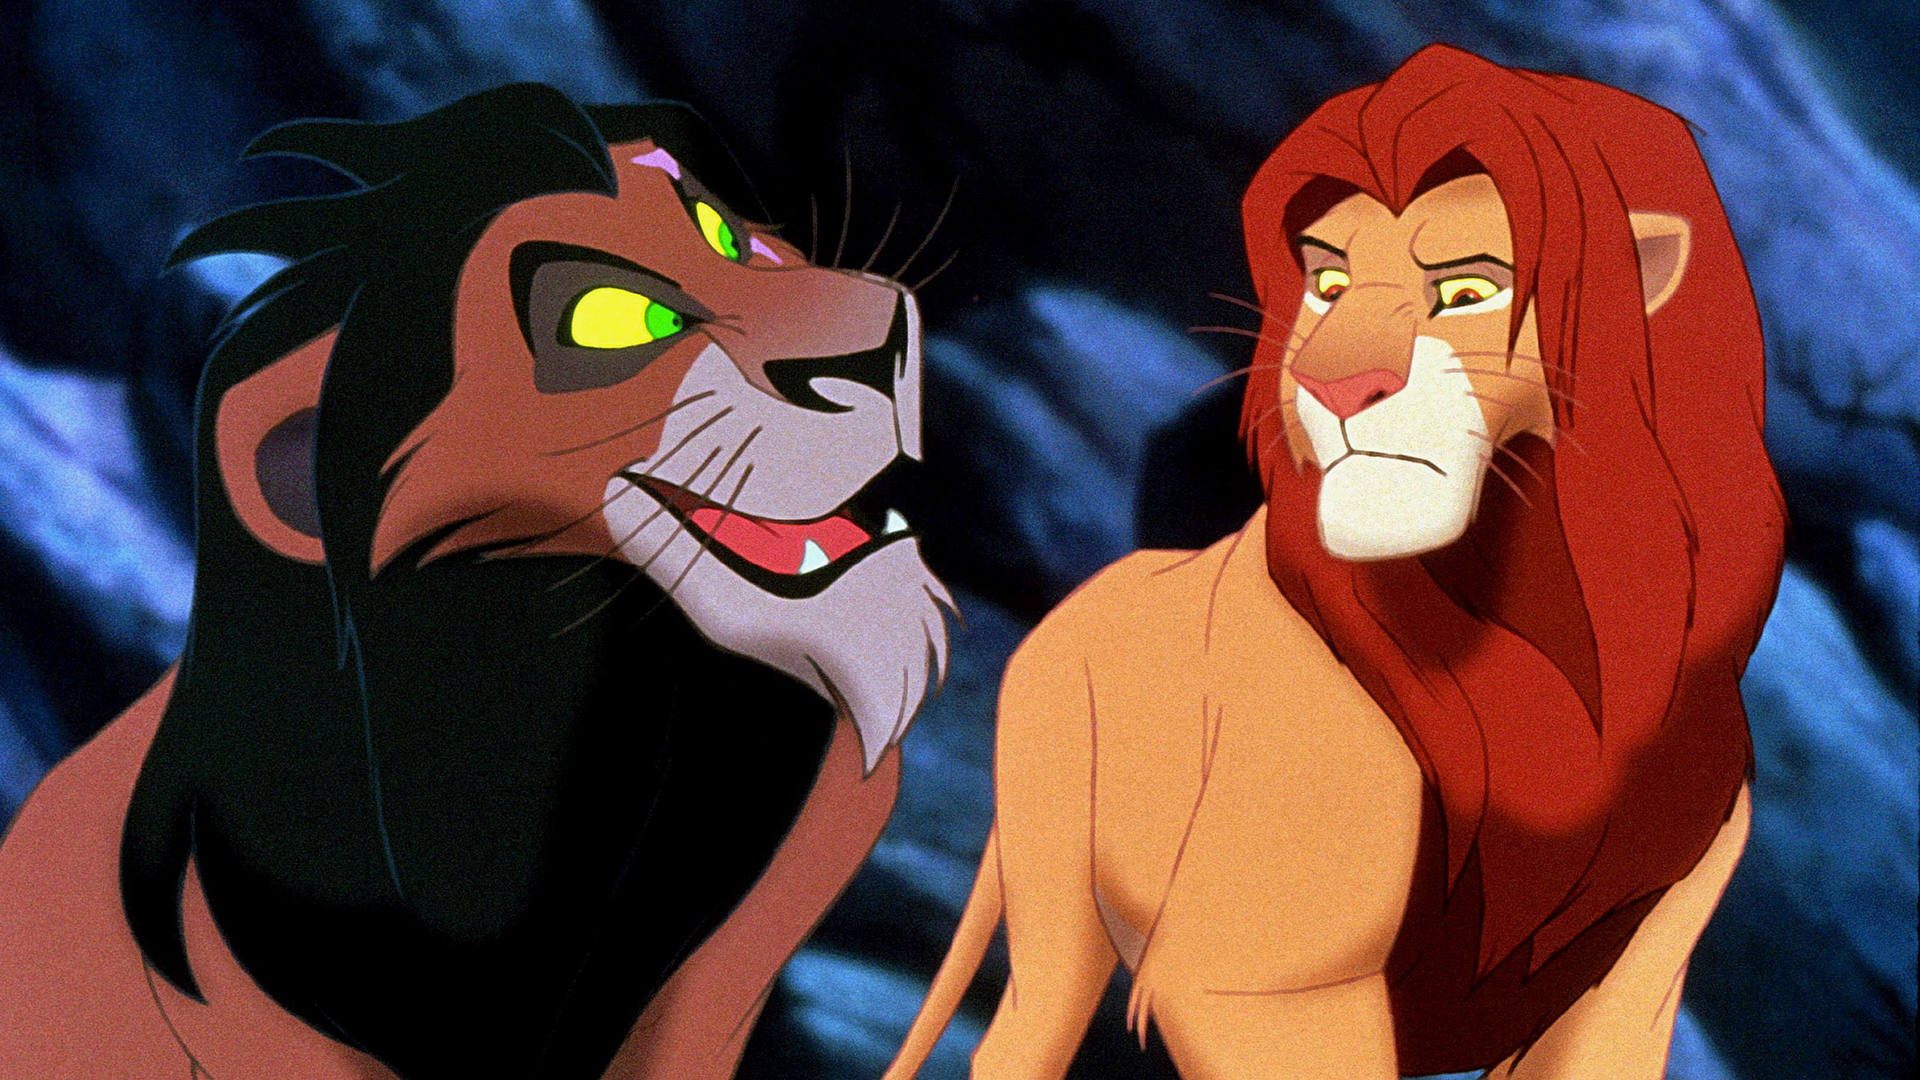 Simba's uncle and Mufasa | Lion King Trivia